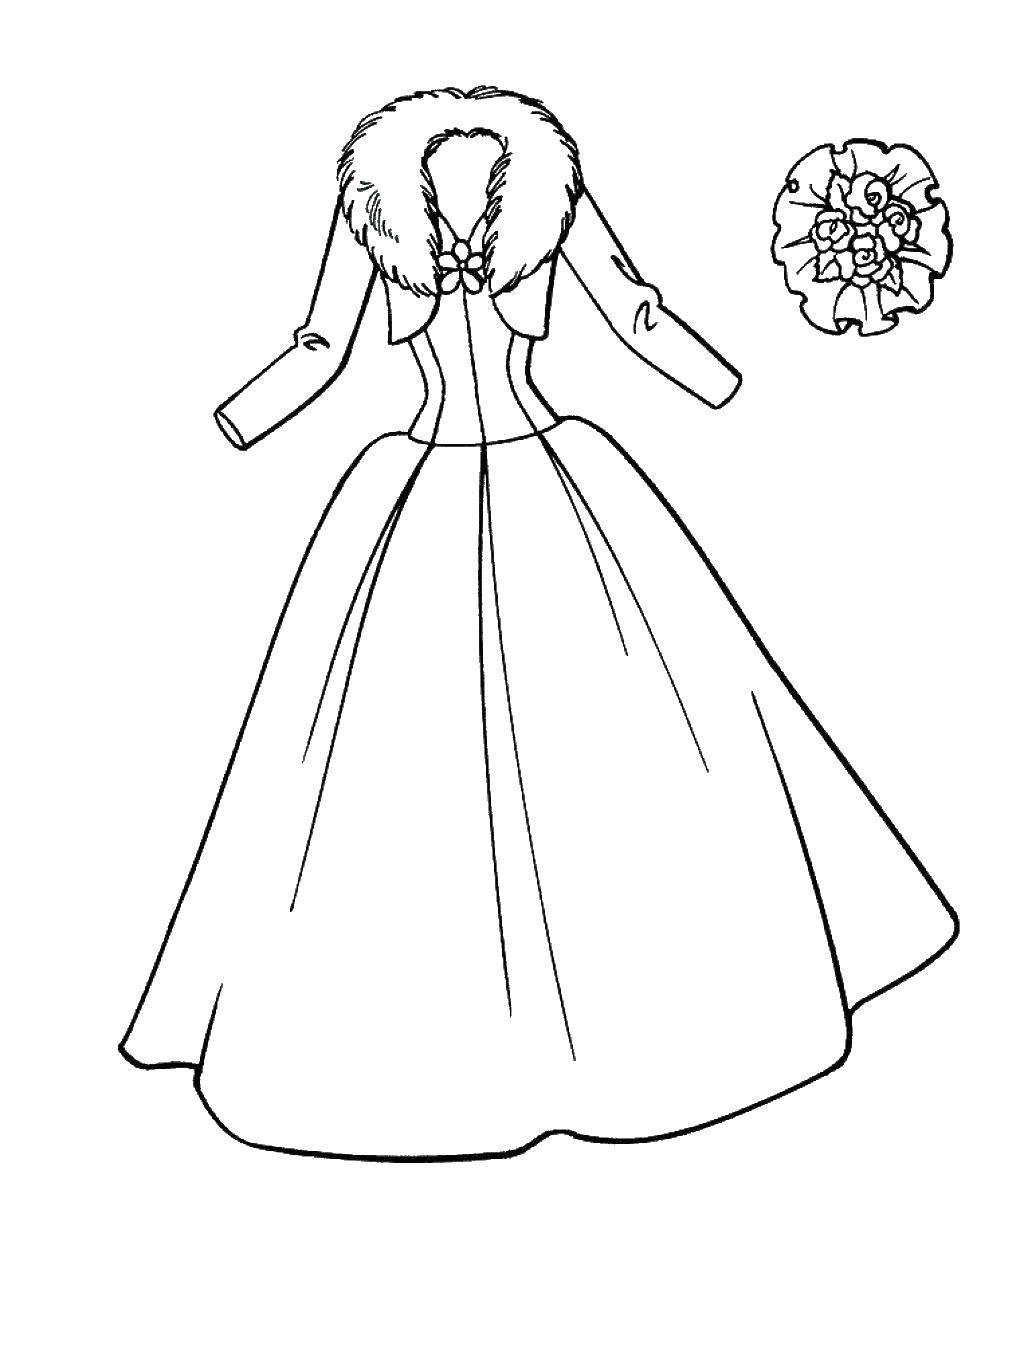 Coloring Winter outfit of the bride. Category Dress. Tags:  Clothing, dress.